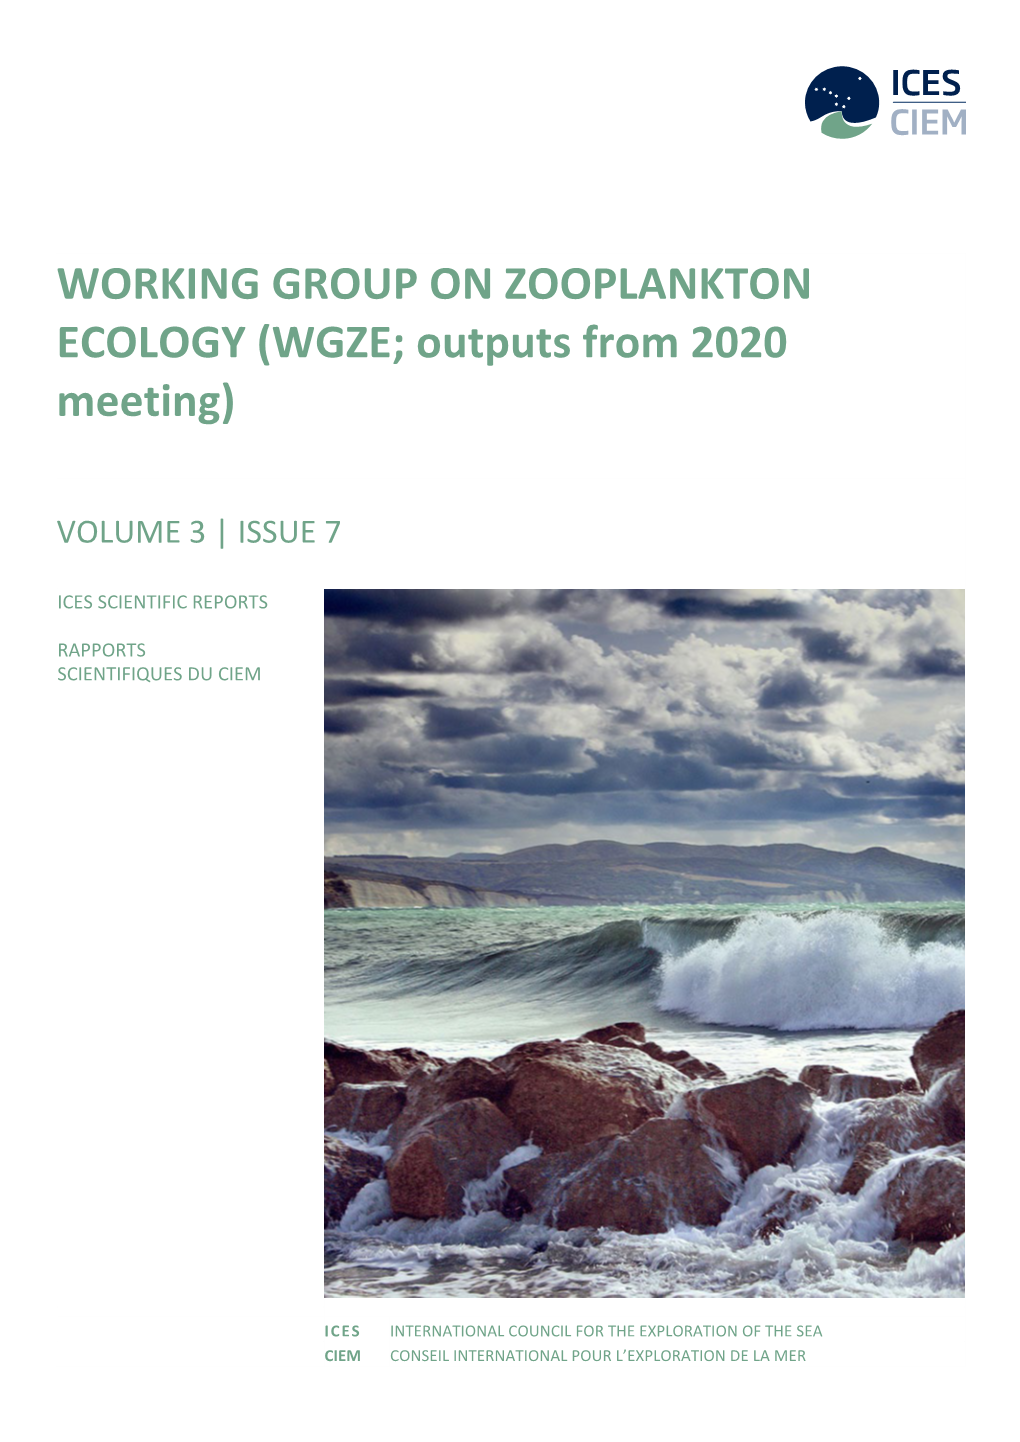 WORKING GROUP on ZOOPLANKTON ECOLOGY (WGZE; Outputs from 2020 Meeting)